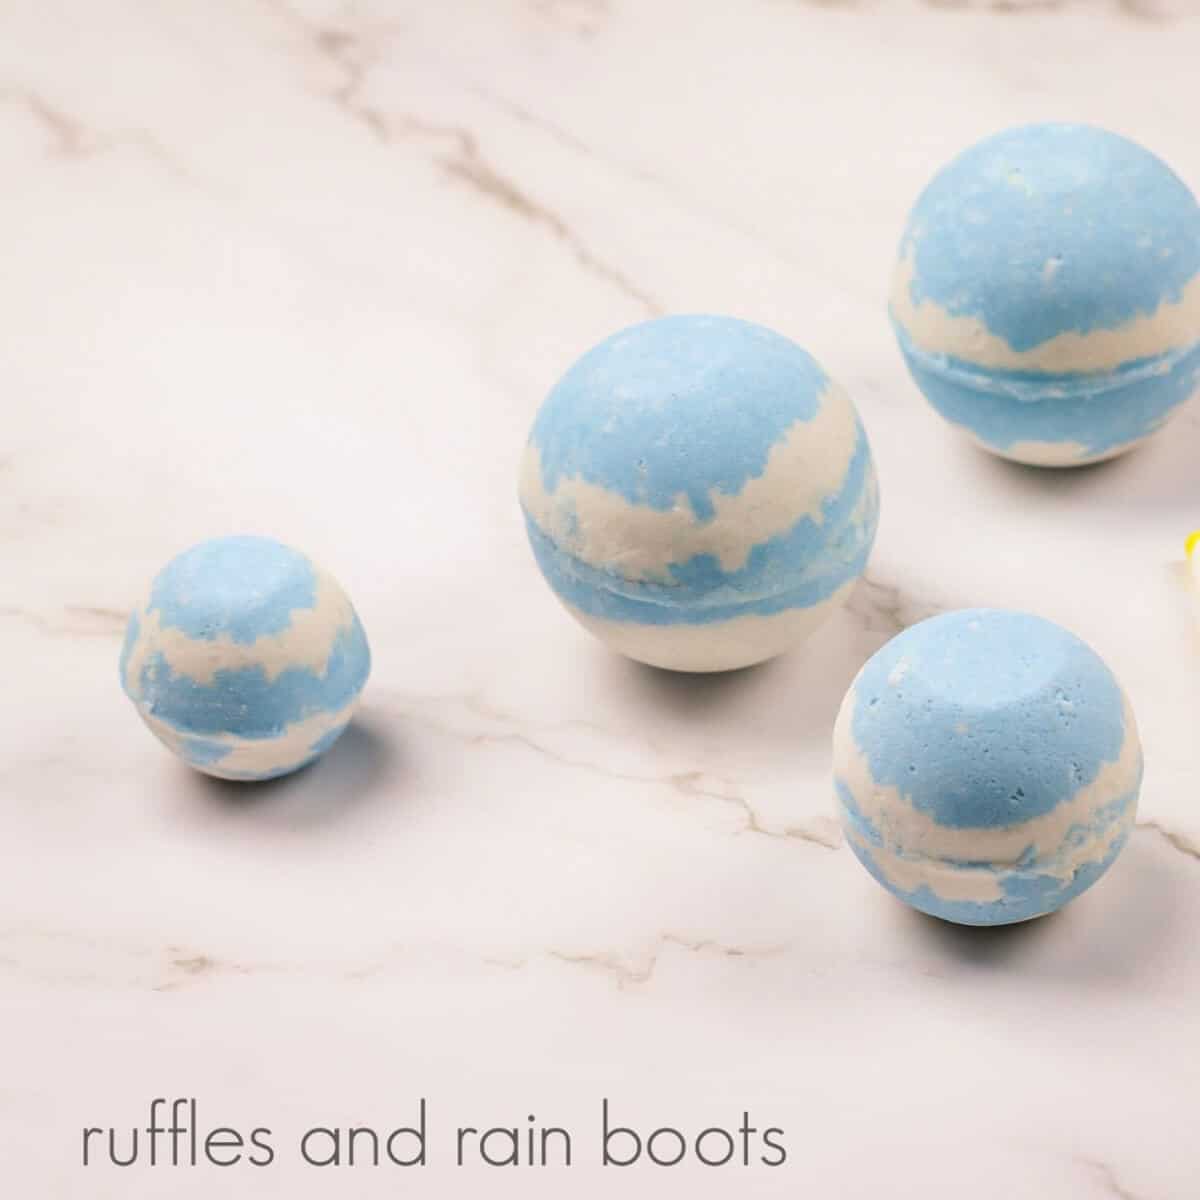 3 large and 1 small blue and white bath bombs, on a white marble background.